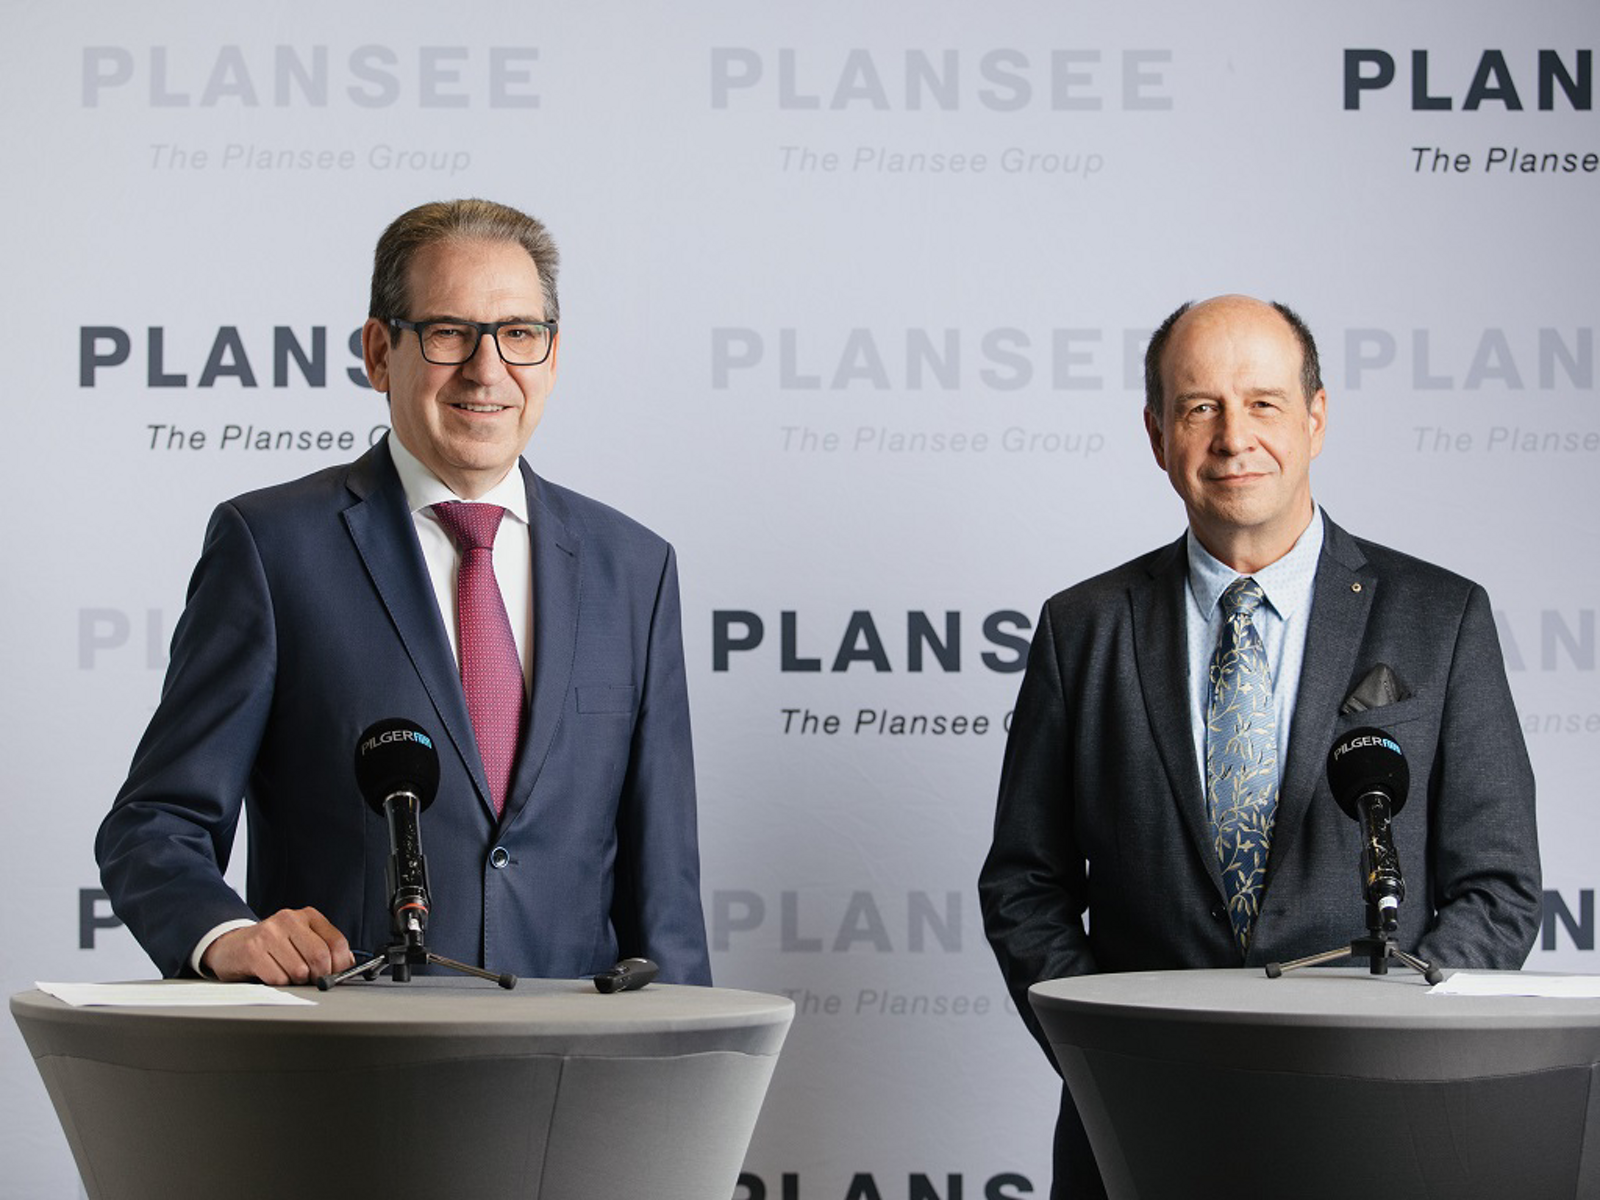 Press conference 2021, Karheinz Wex and Dr Wolfgang Köck